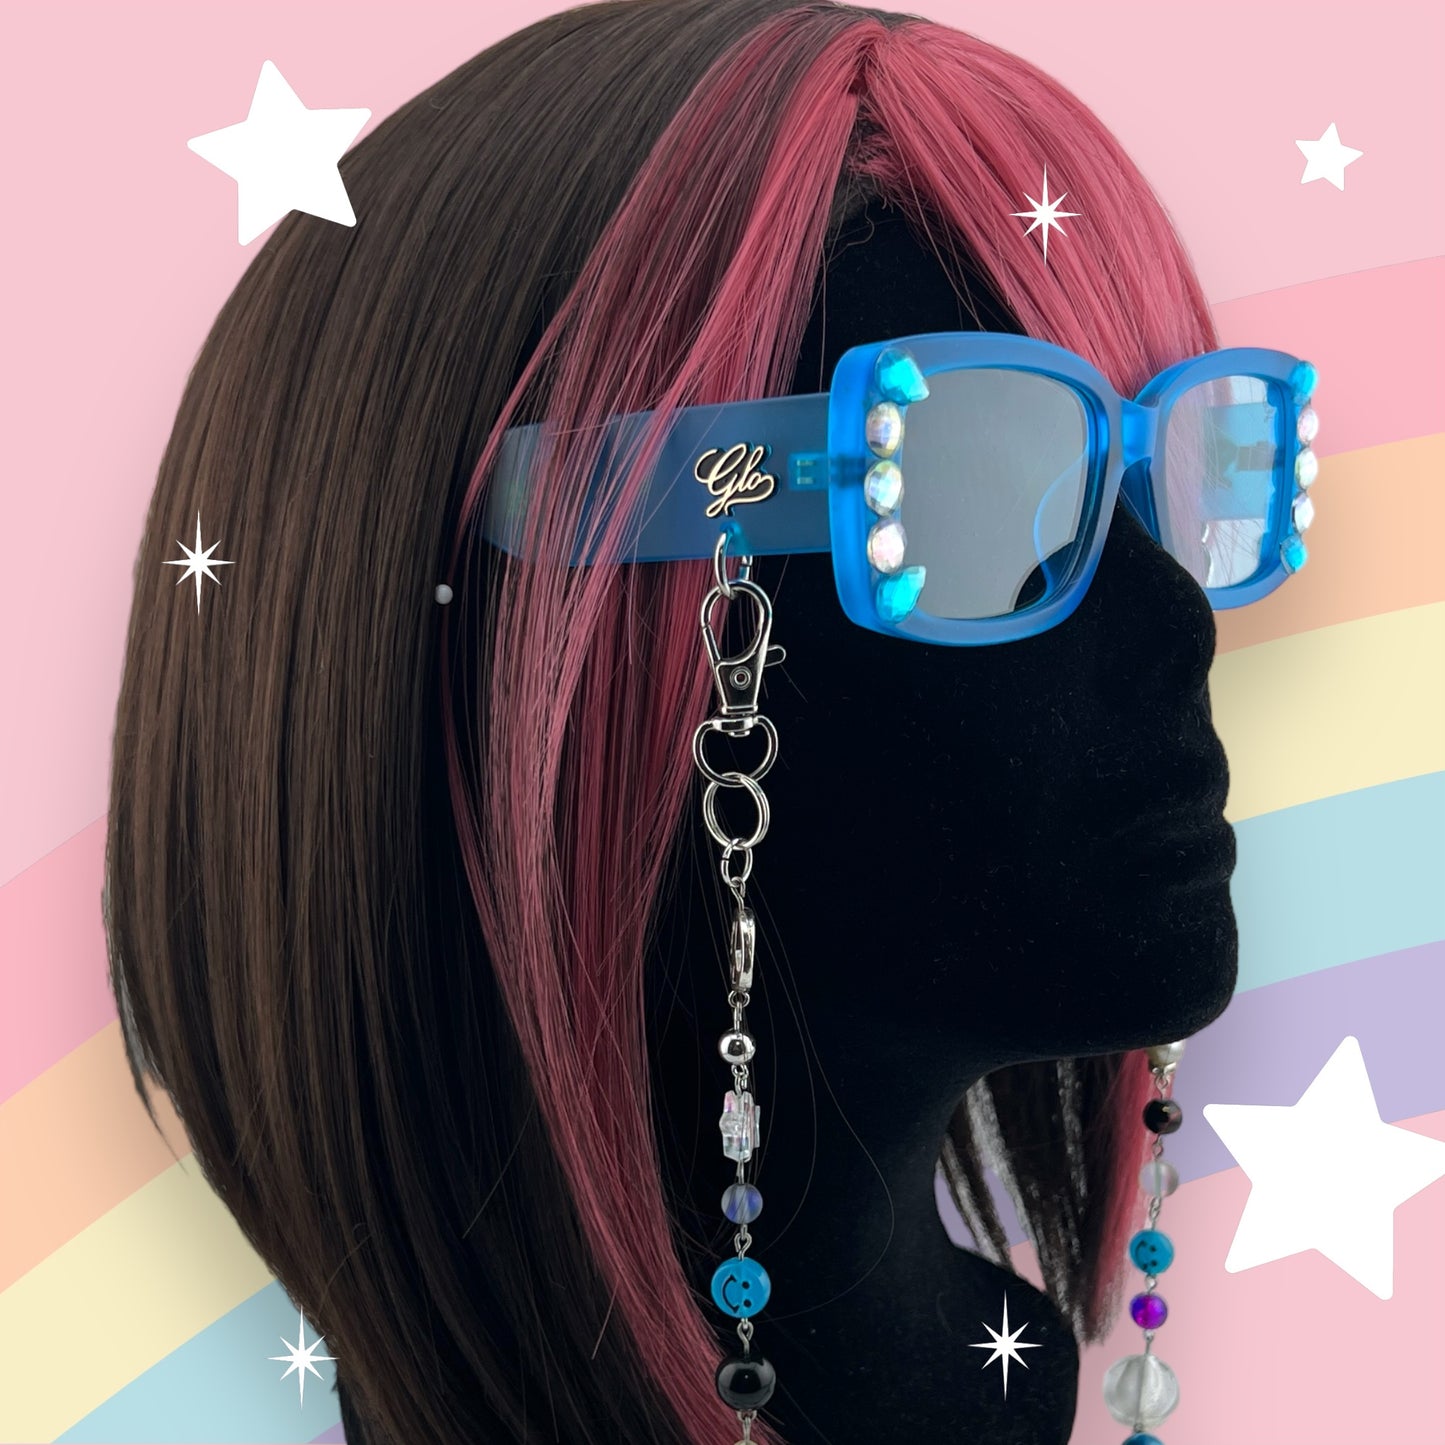 Glam Hippie Blue Festival Rave Sunglasses with Matching Glasses Chain